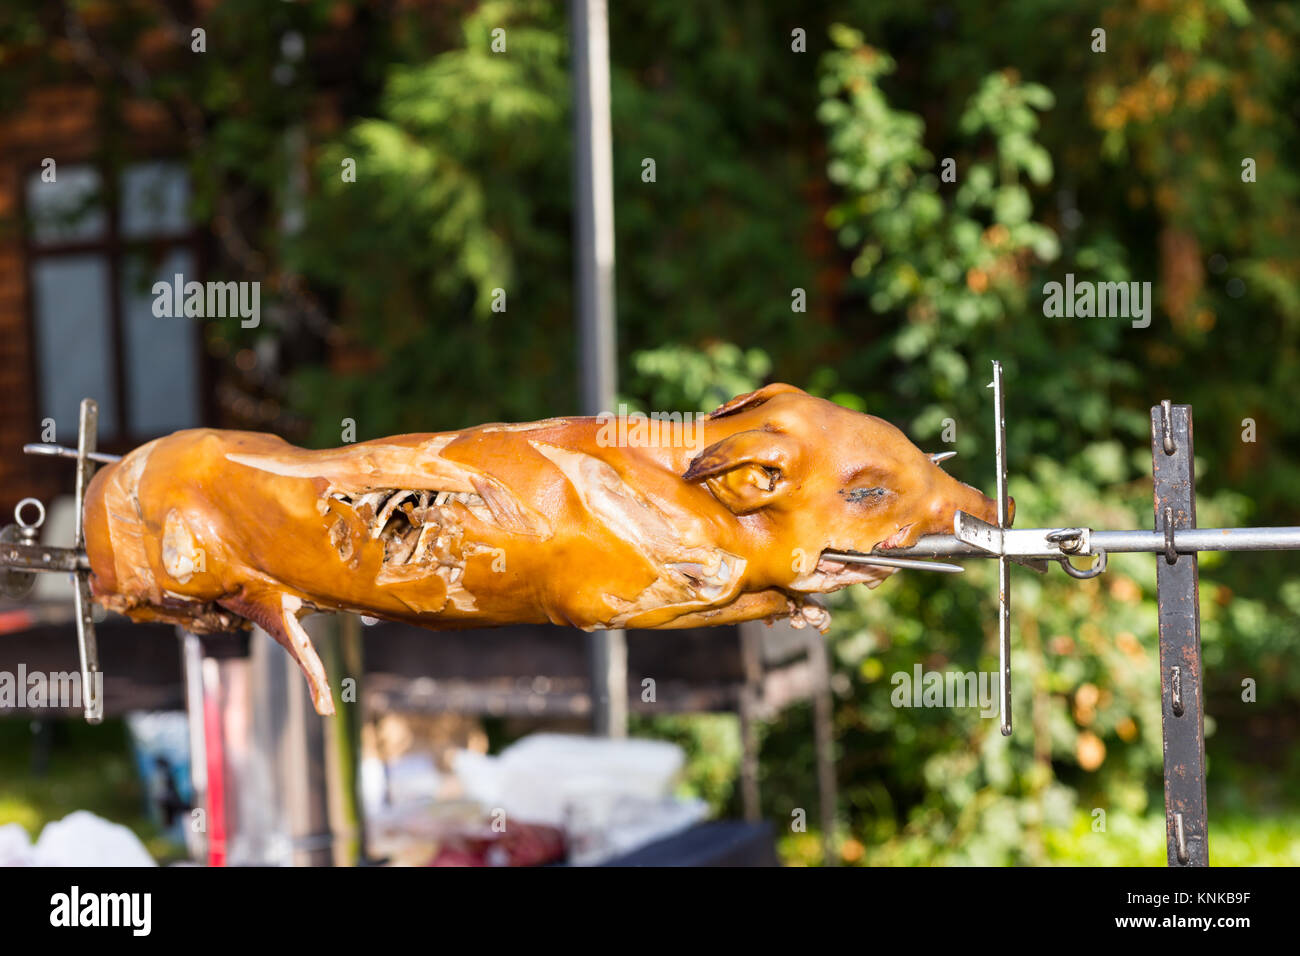 Roasted pig on a traditional spit outdoor on food festival. Food and beverages concept Stock Photo